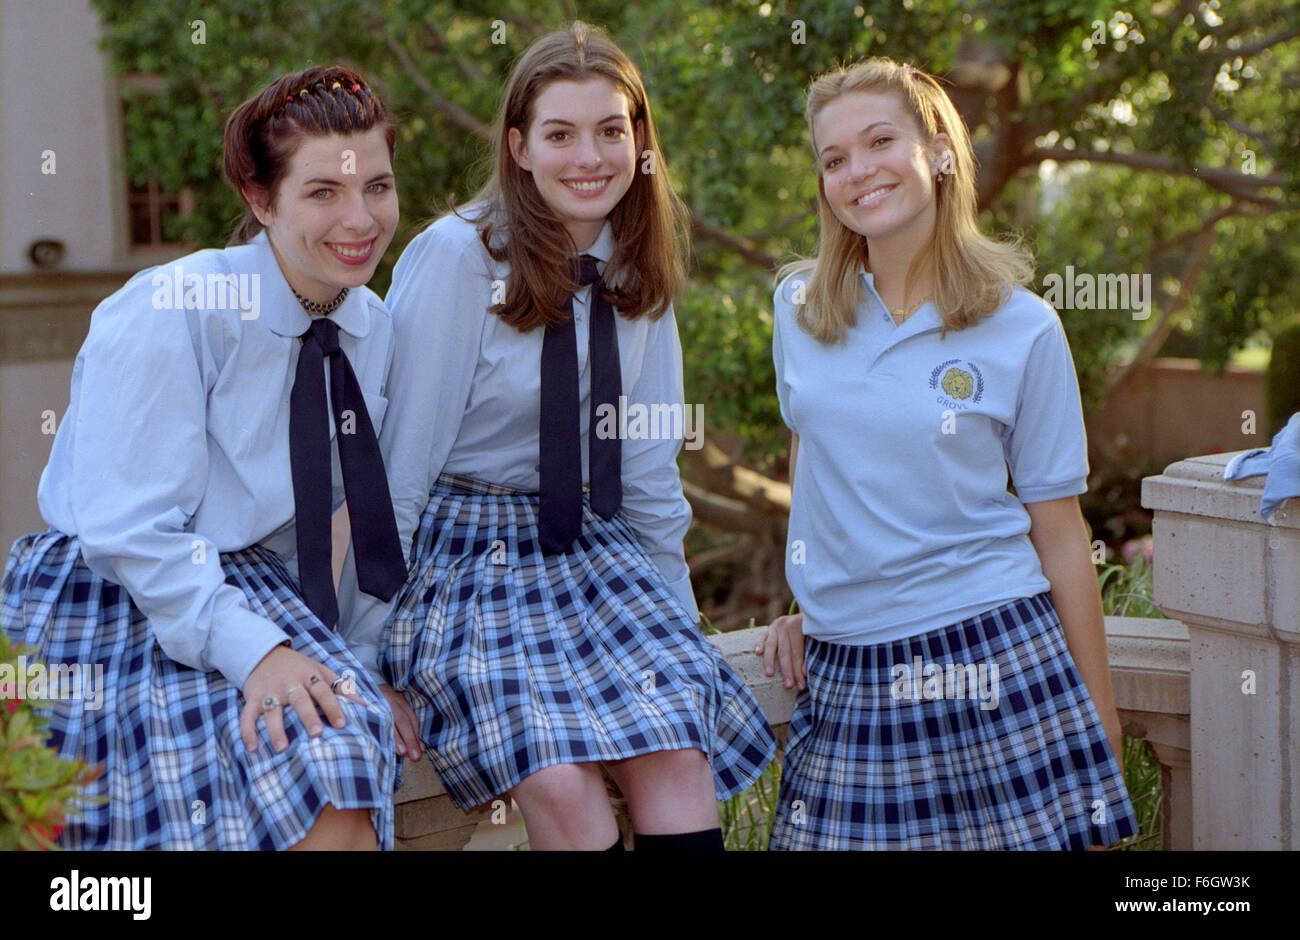 Jul 29, 2001; Los Angeles, CA, USA; Actors HEATHER MATARAZZO as Lilly Moscovitz, ANNE HATHAWAY as Mia Thermopolis and MANDY MOORE as Lana Thomas in 'The Princess Diaries'. Directed by Garry Marshall. Stock Photo